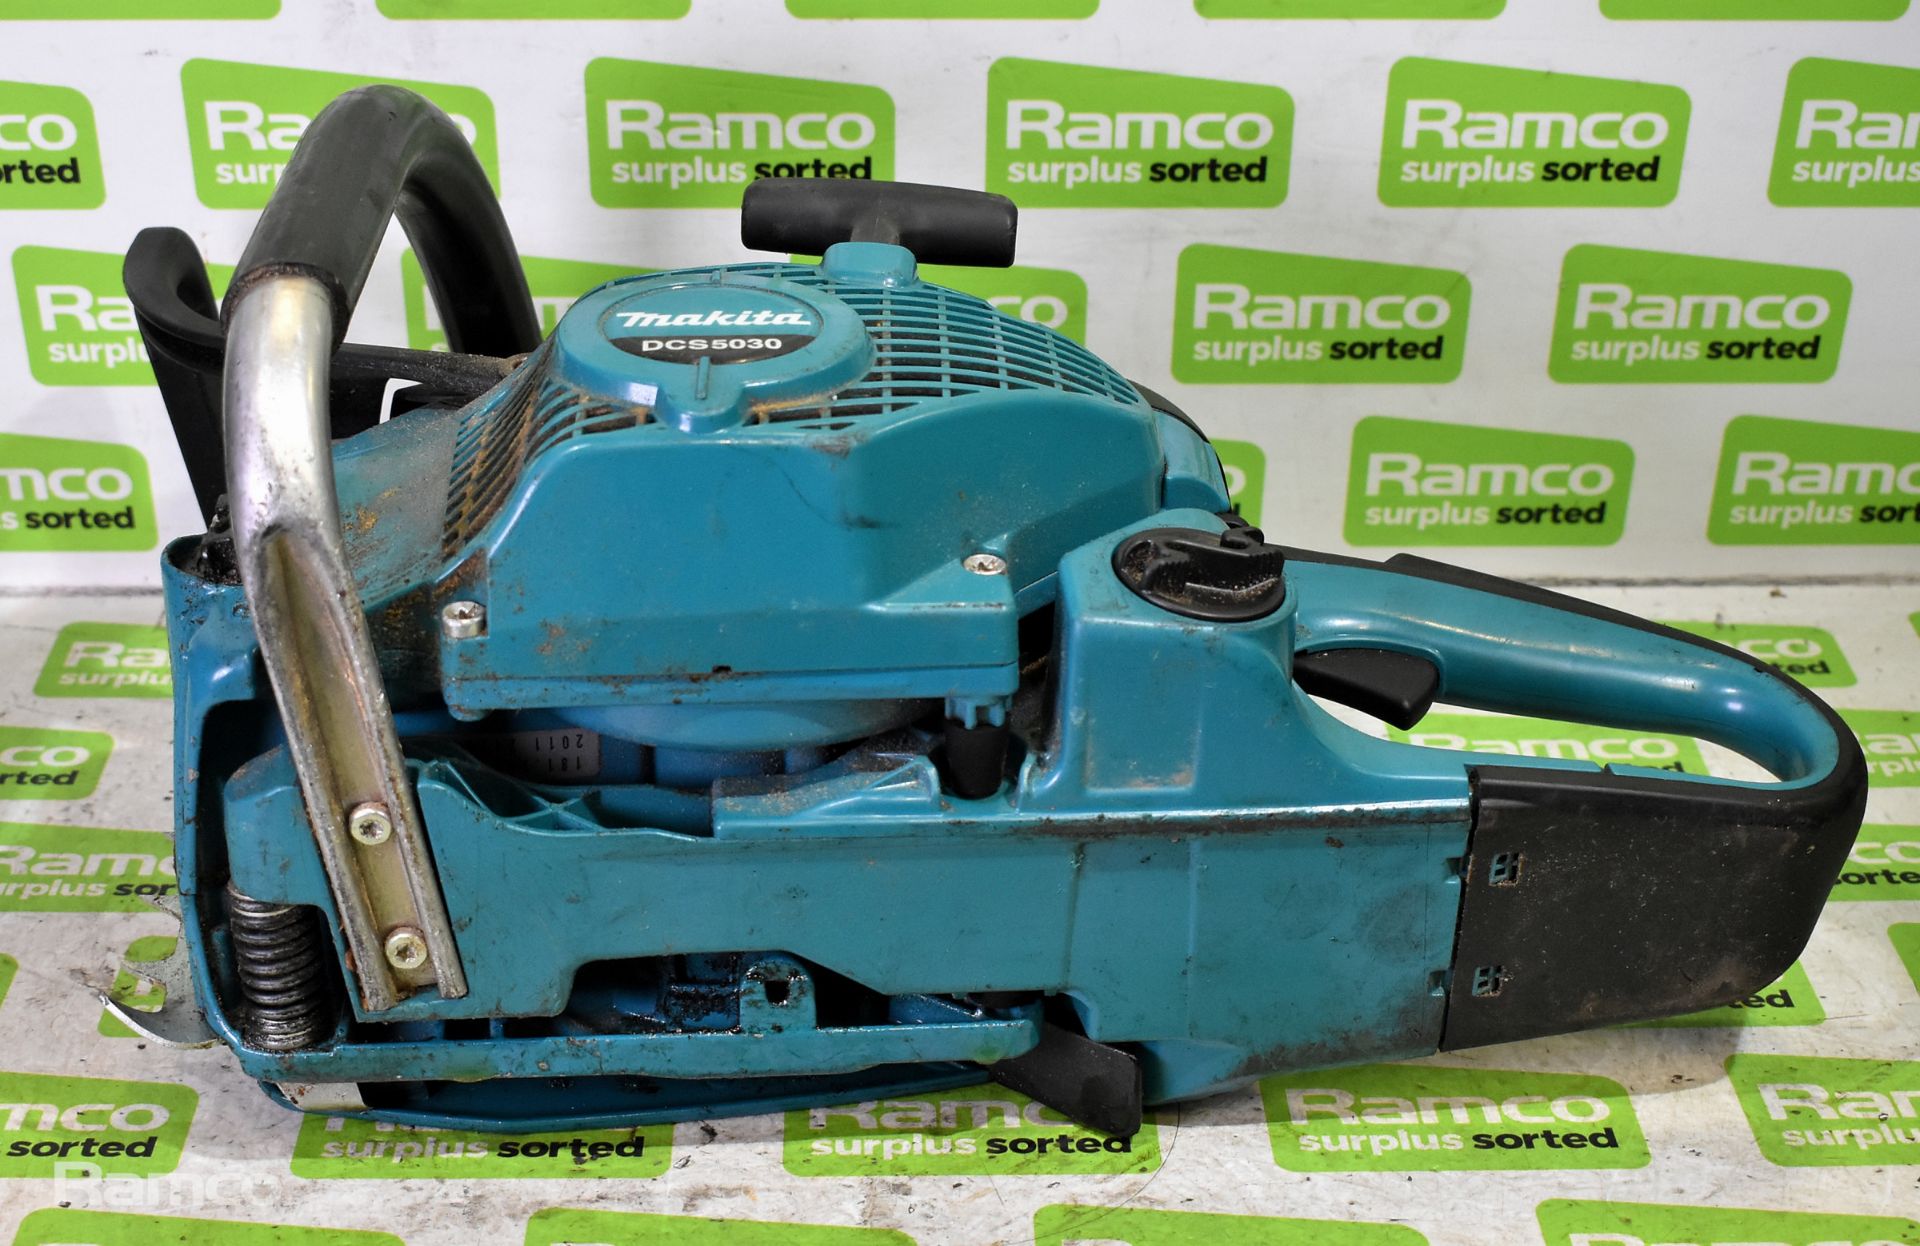 4x Makita DCS5030 50cc petrol chainsaws - BODIES ONLY - AS SPARES OR REPAIRS - Image 6 of 21